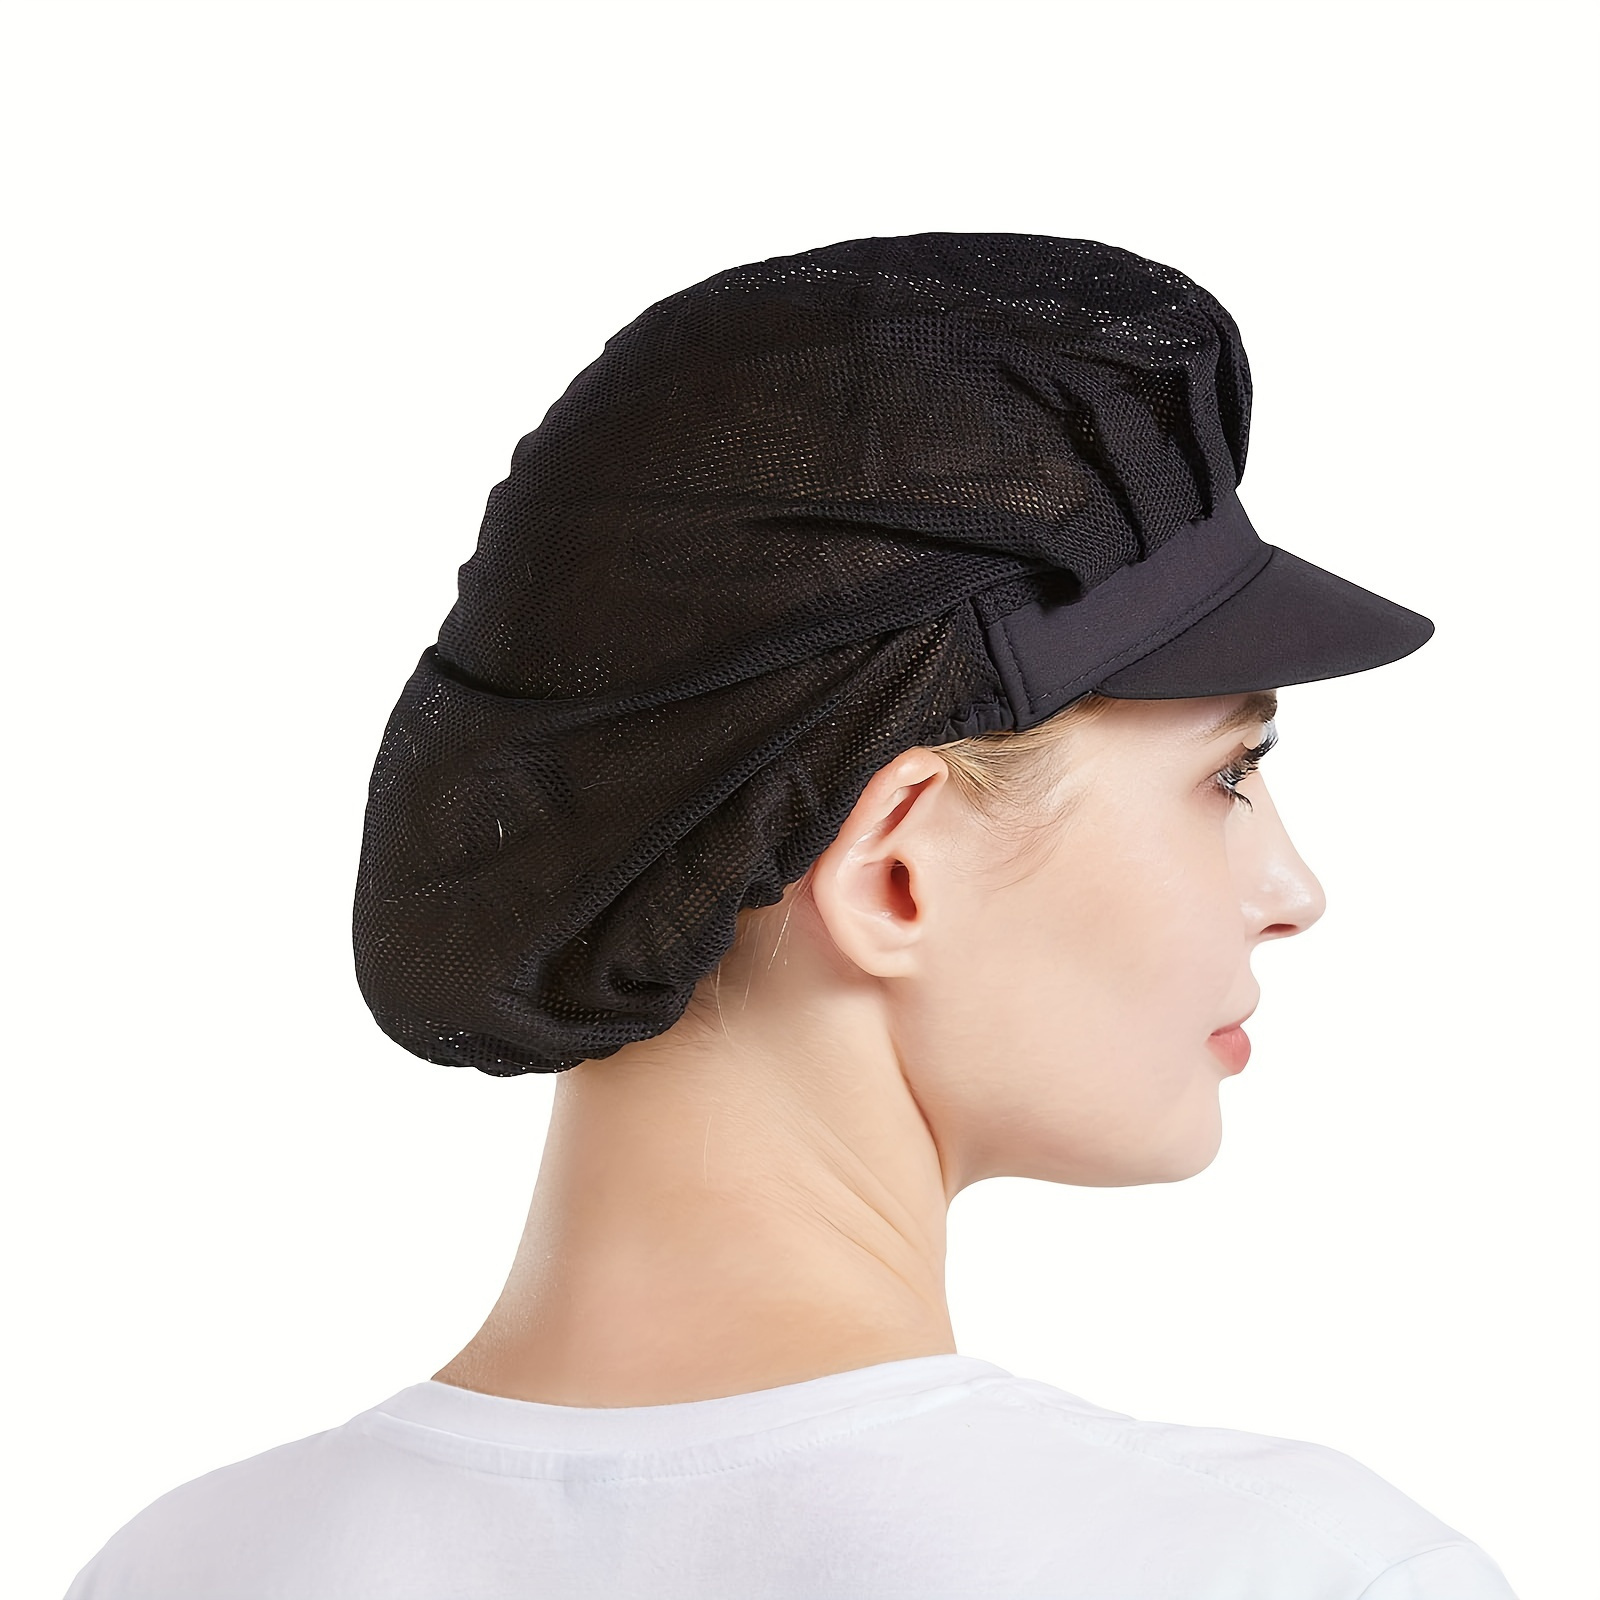 professional mesh chef hat black breathable pleated hat elastic adjustable fit comfortable lightweight cooking cap for kitchen food service staff